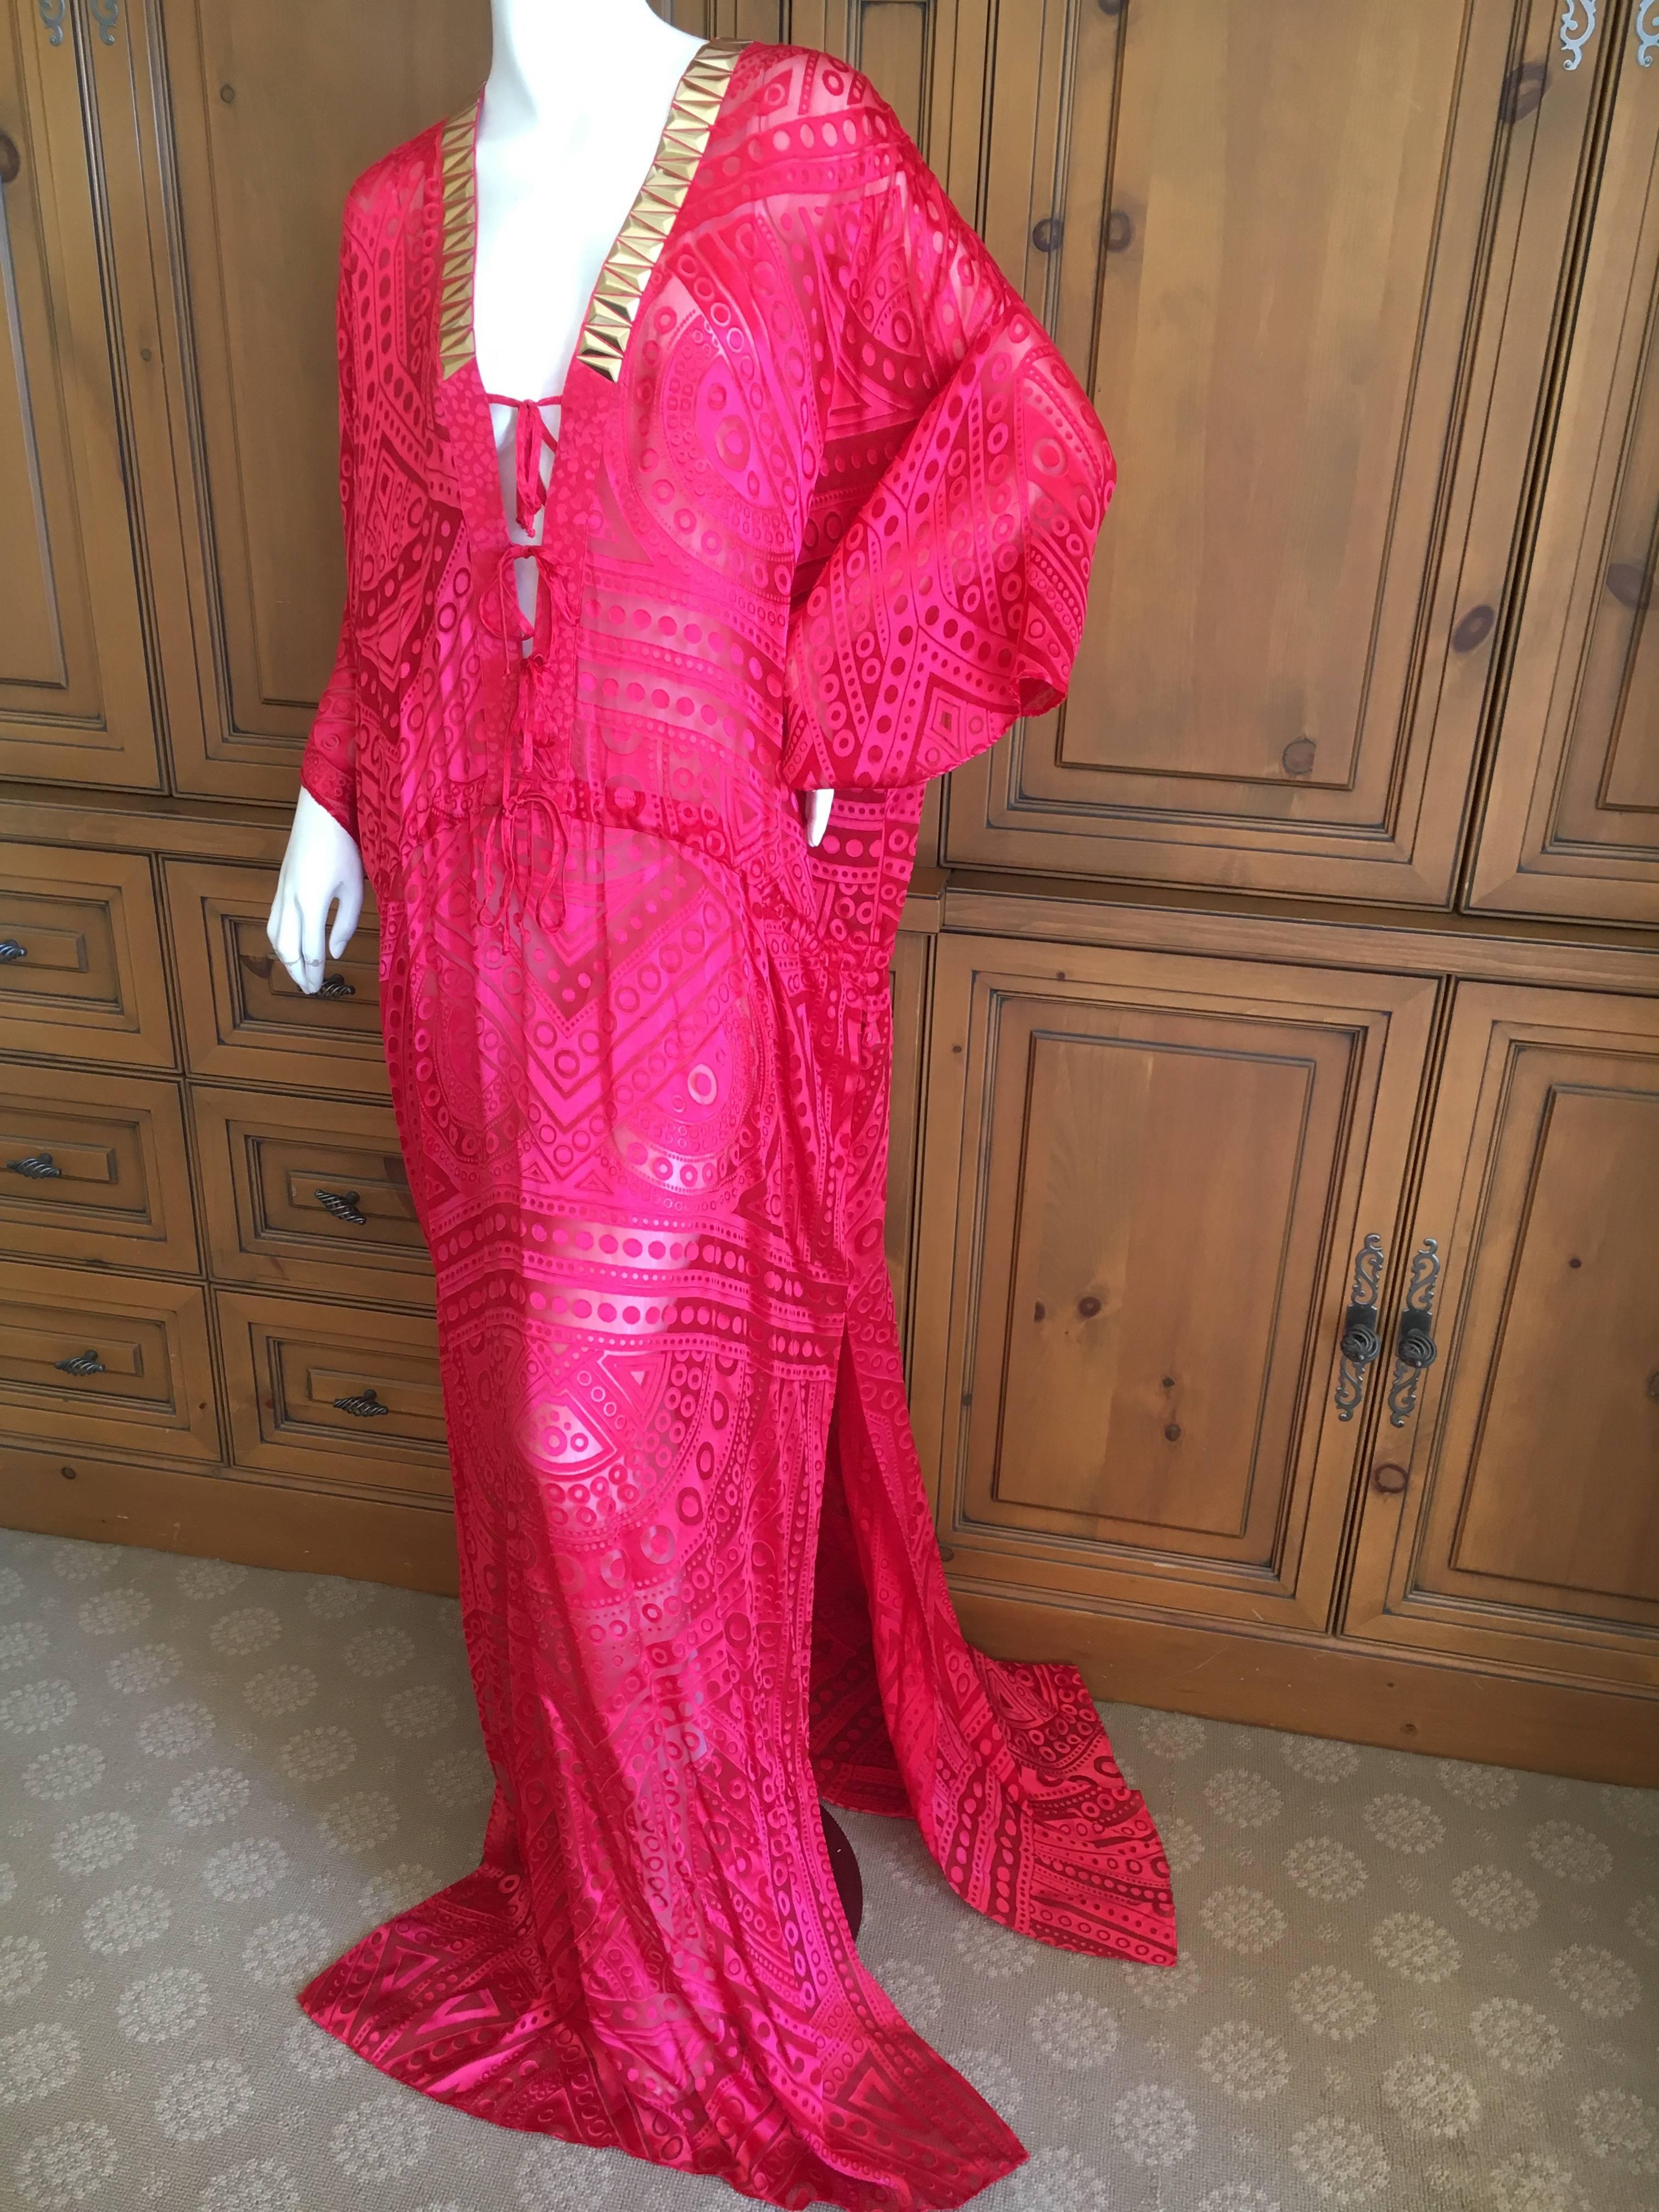 Roberto Cavalli Sheer Red Caftan with Gold Embellishents for Just Cavalli.
New with tags.
Size 40